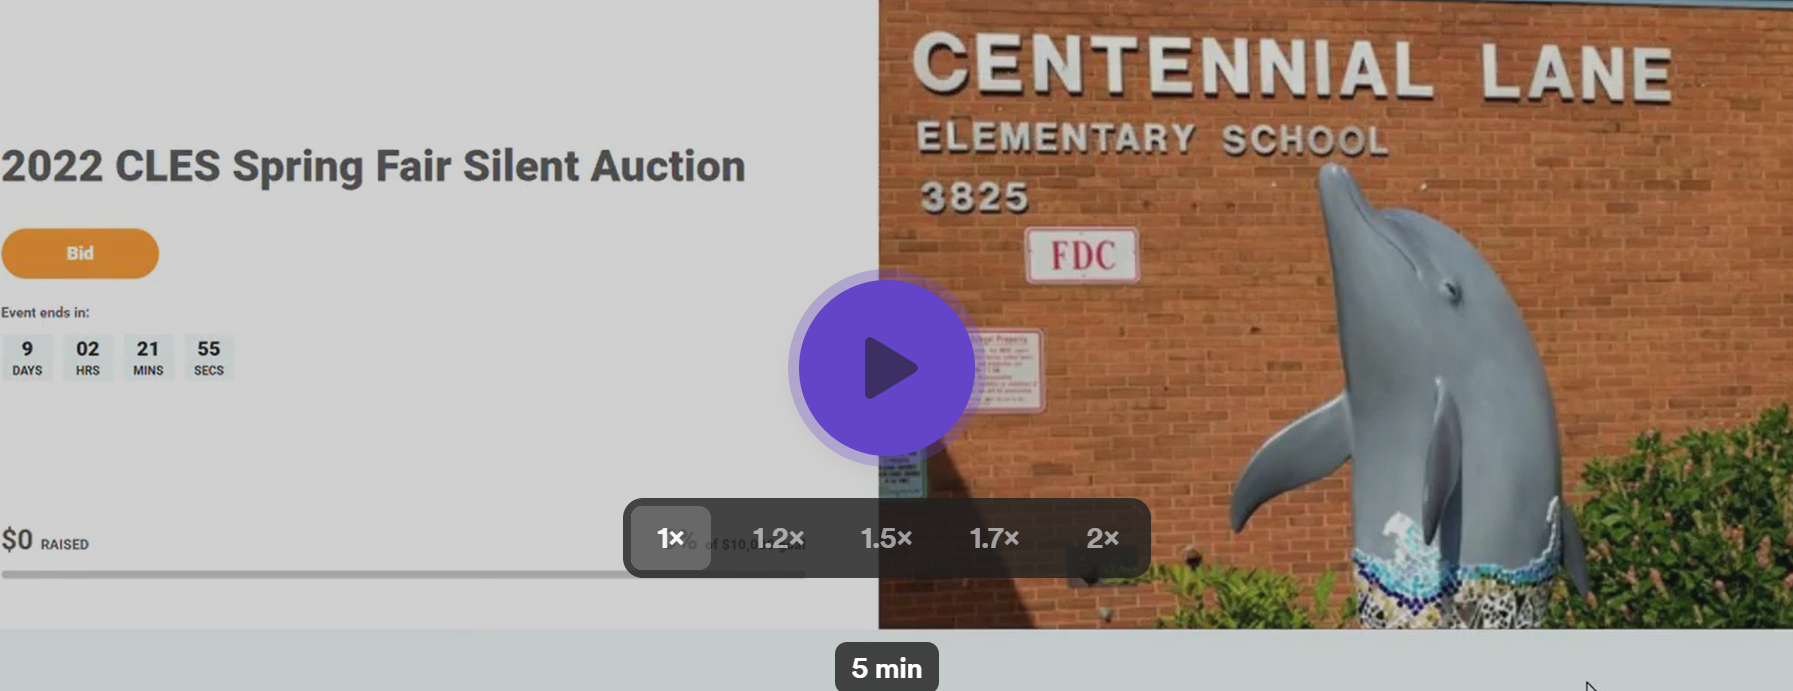 Picture and link to a how to video on how to set up a memberhub account so people can bid on silent auction items